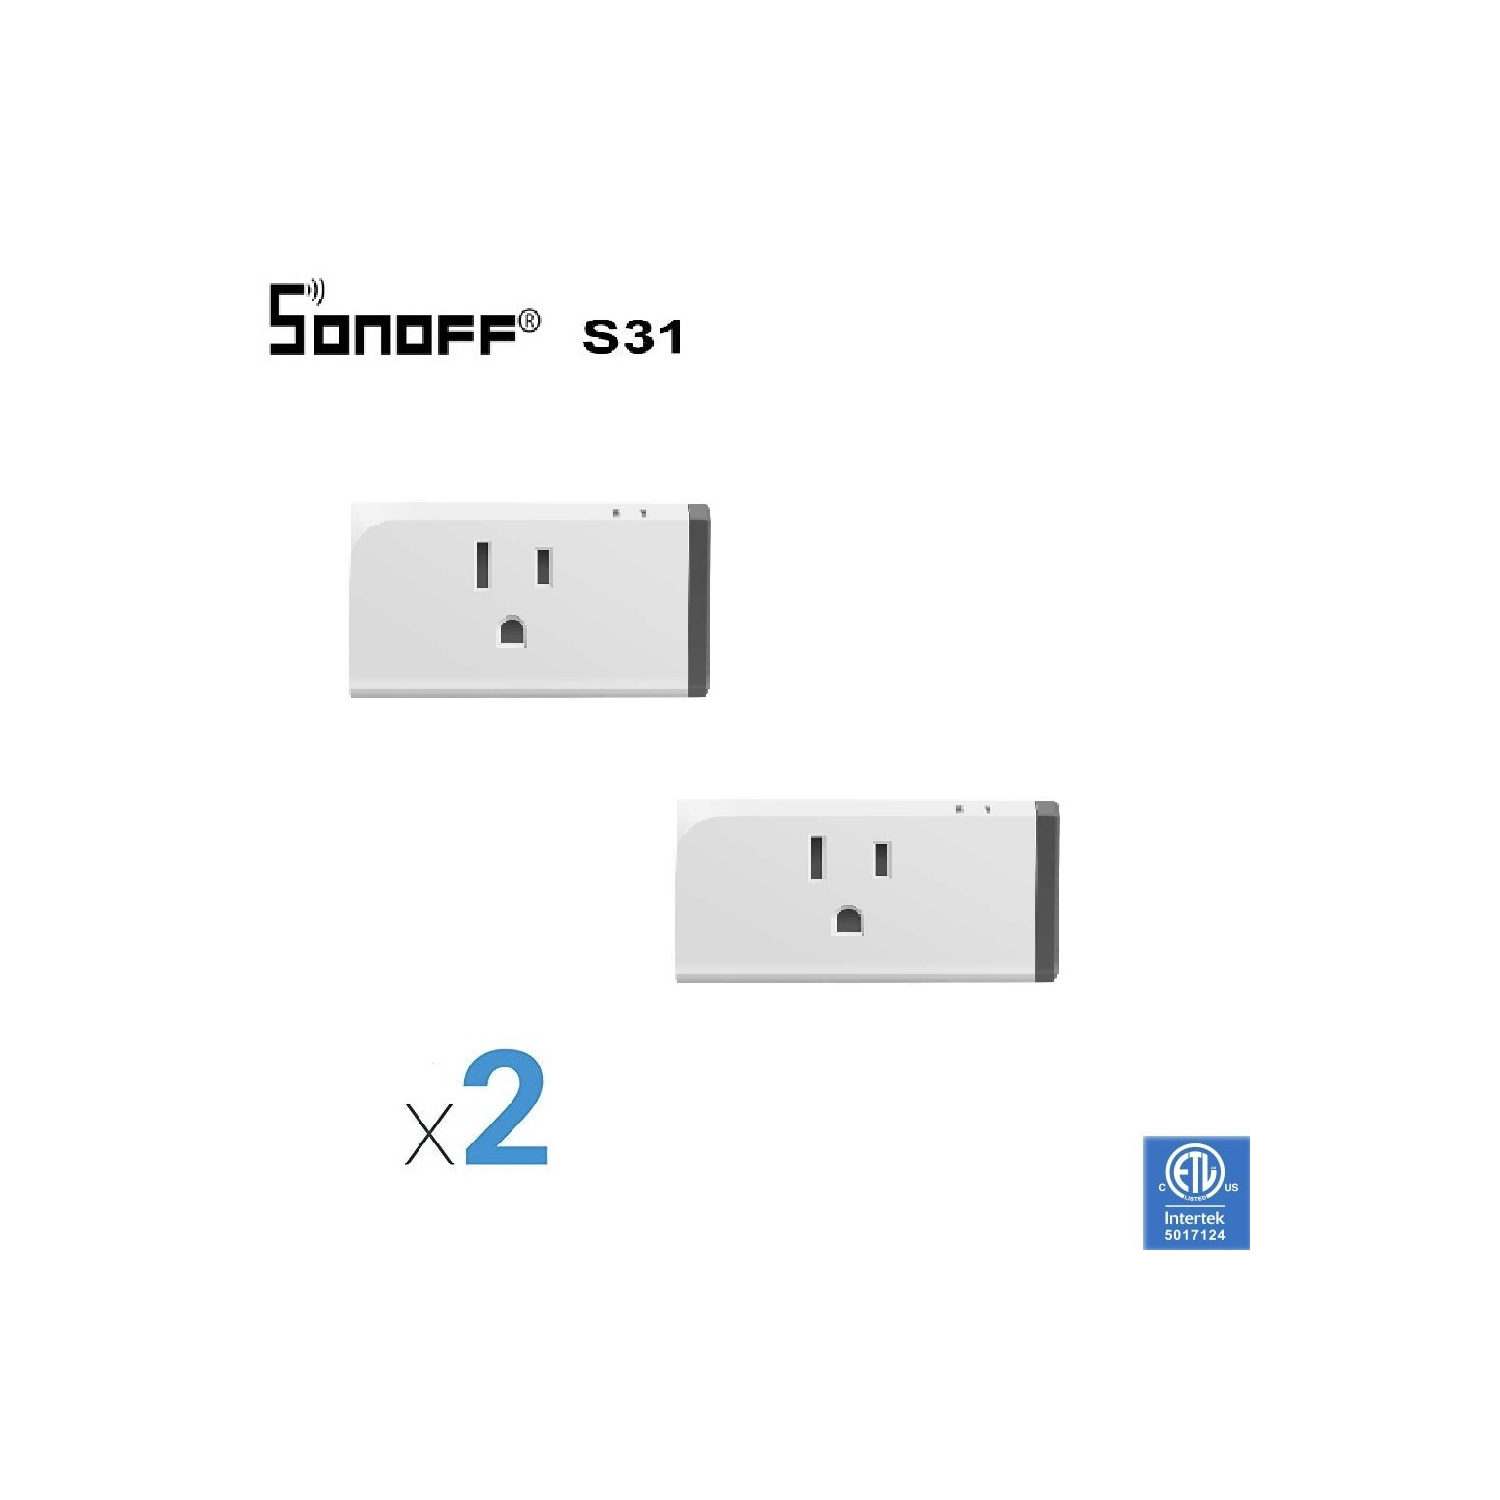 Sonoff S31 - set of 2 - Smart WiFi Socket Remote Control Switch Outlet